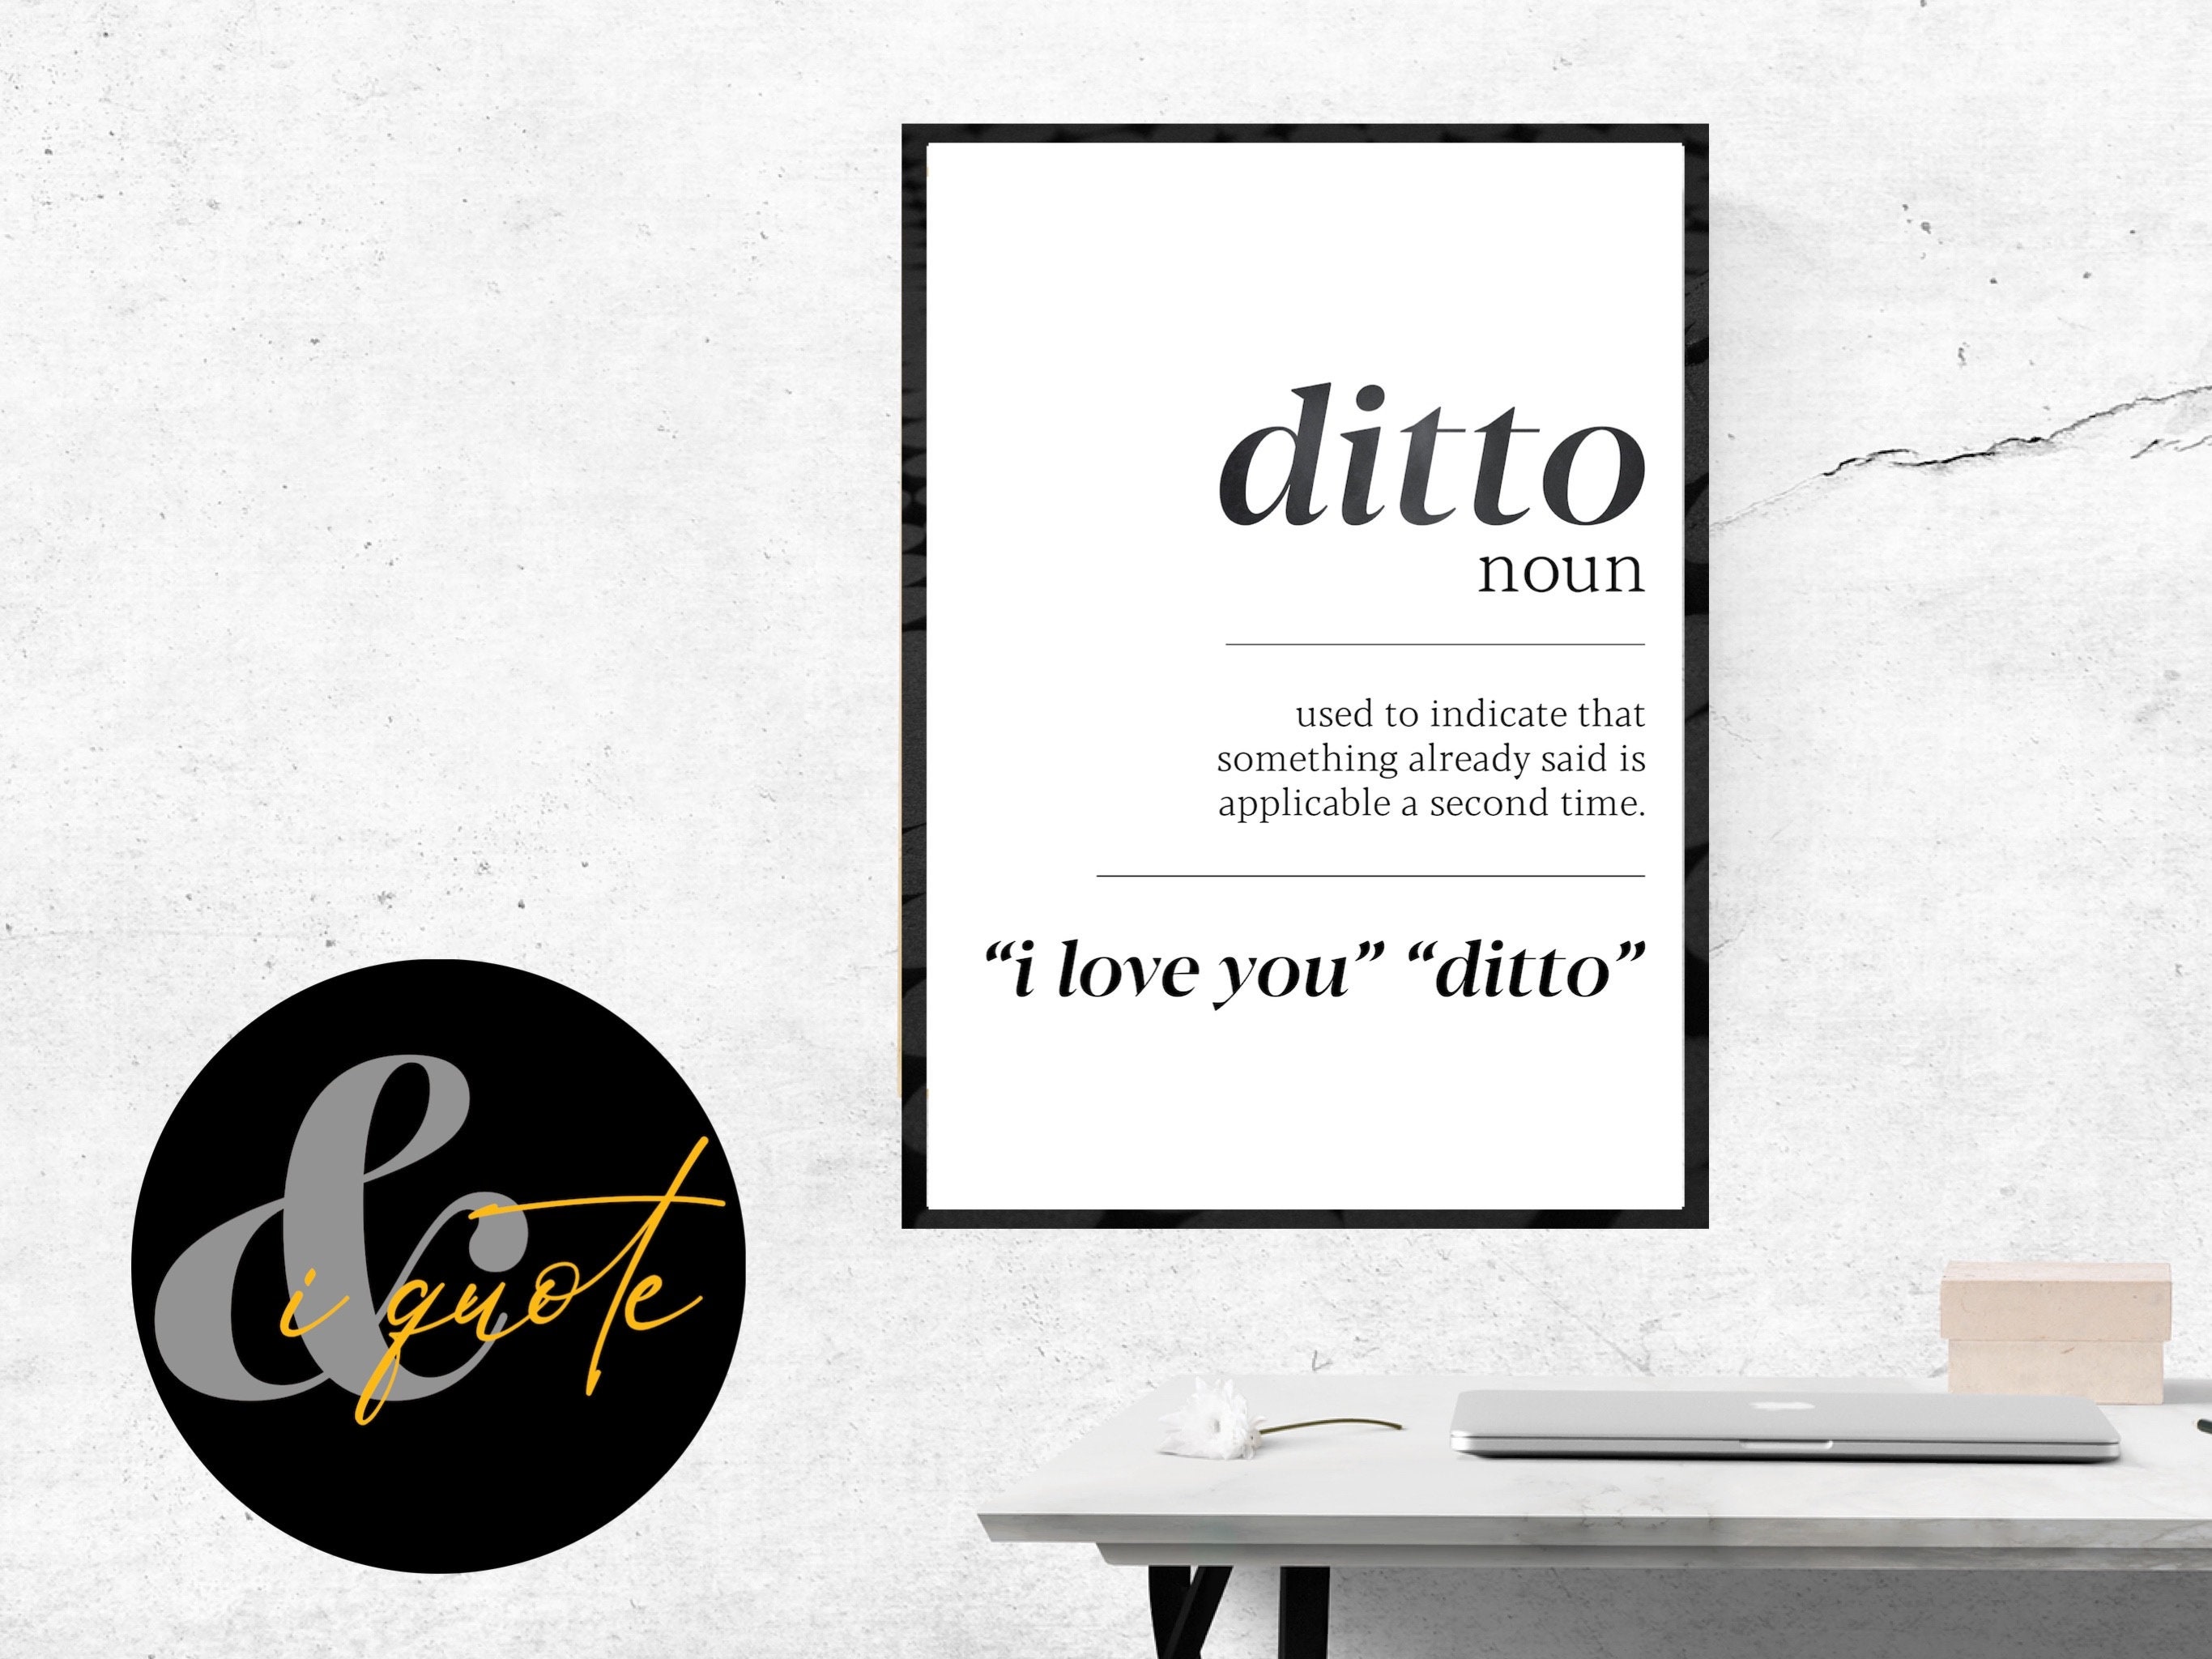 D.I.T.T.O: What does DITTO mean in Business? Drop In To